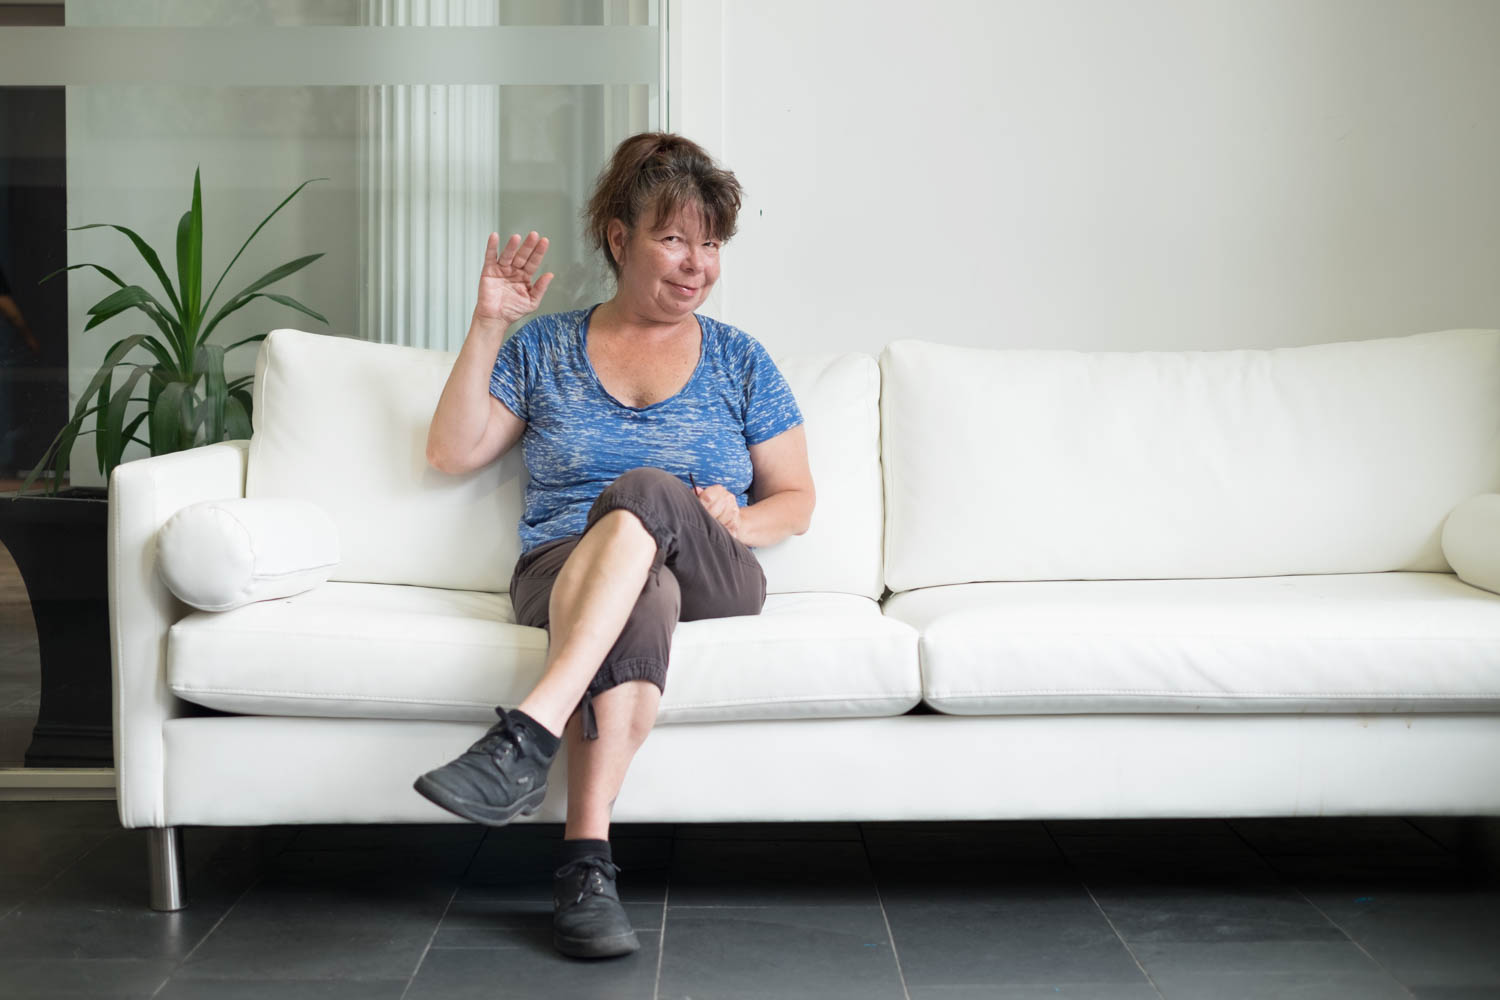 Colleen wearing a blue T-shirt, brown capris, and black laced shoes sitting on a white couch and waving to the camera. Colleen has their hair in a pony tail  and there is a white pillar and a potted plant in the background.